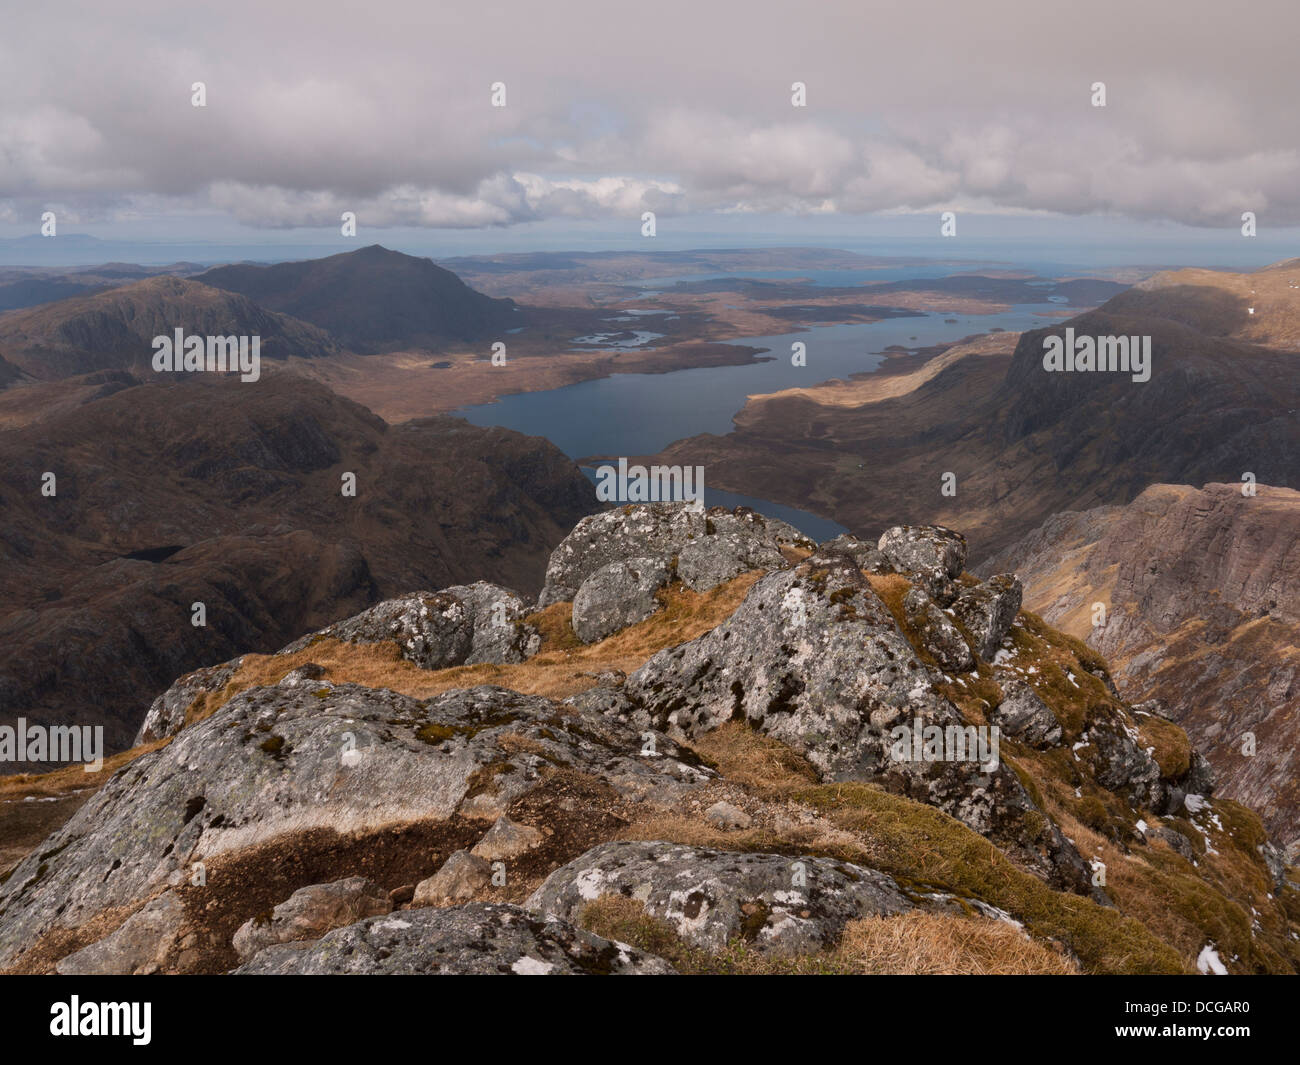 View from the summit of A' Mhaighdean with Beinn Airigh Charr in the distance and Fionn Loch and Dubh Loch below, Scotland UK Stock Photo